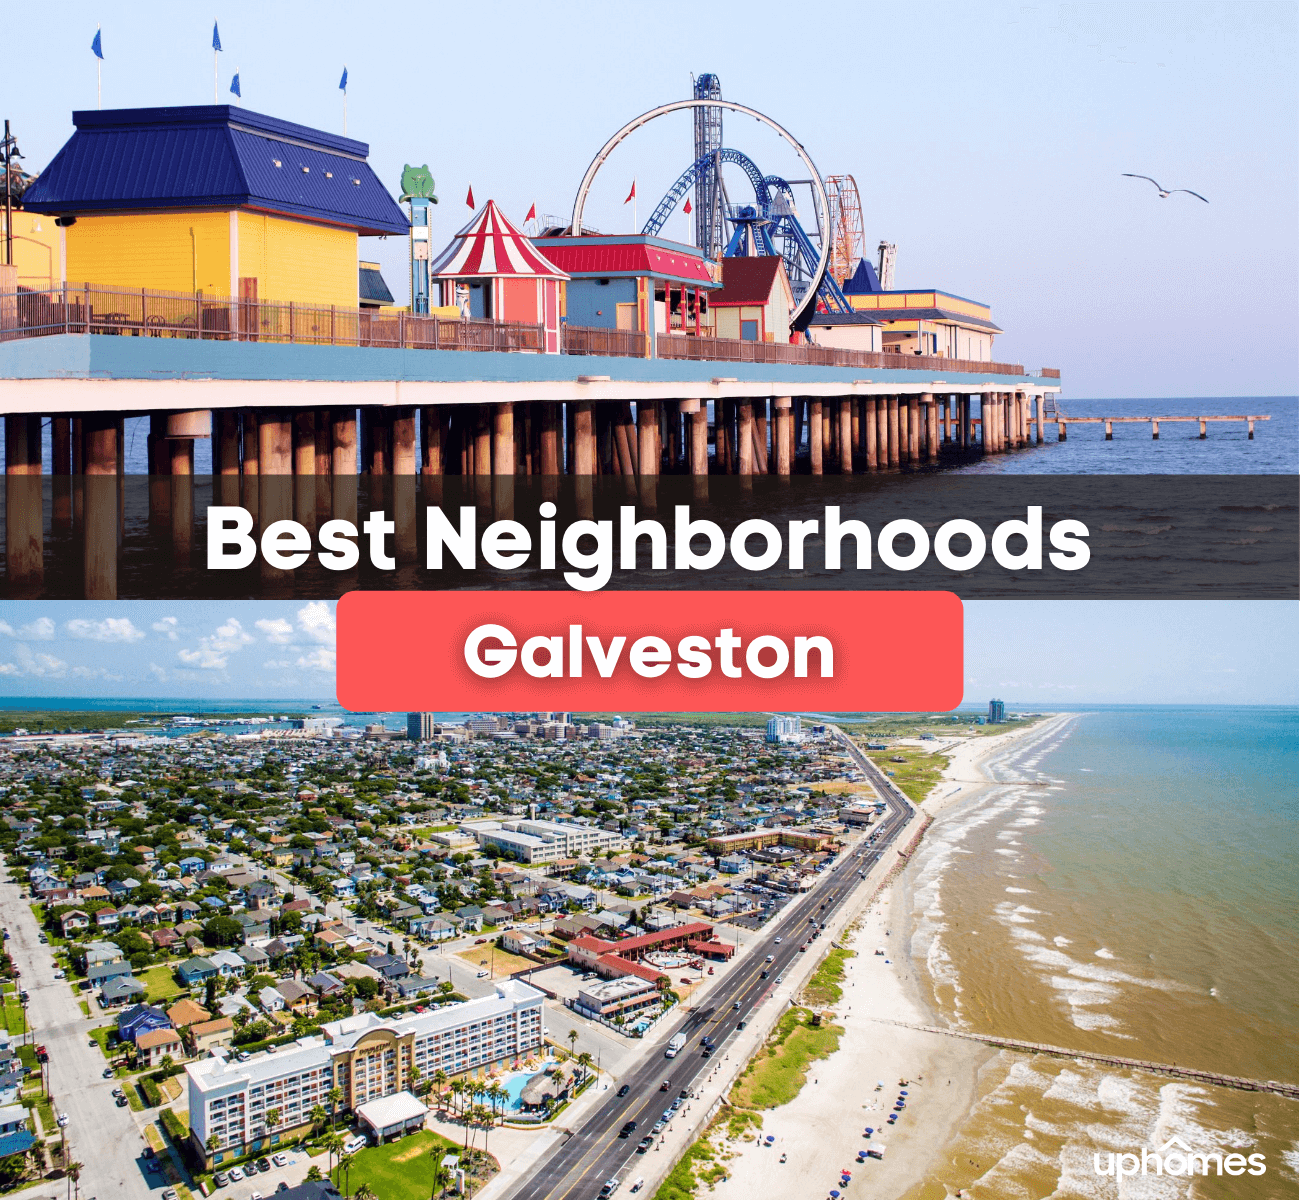 7 Best Neighborhoods in Galveston TX - What are the best places to live in Galveston Texas?